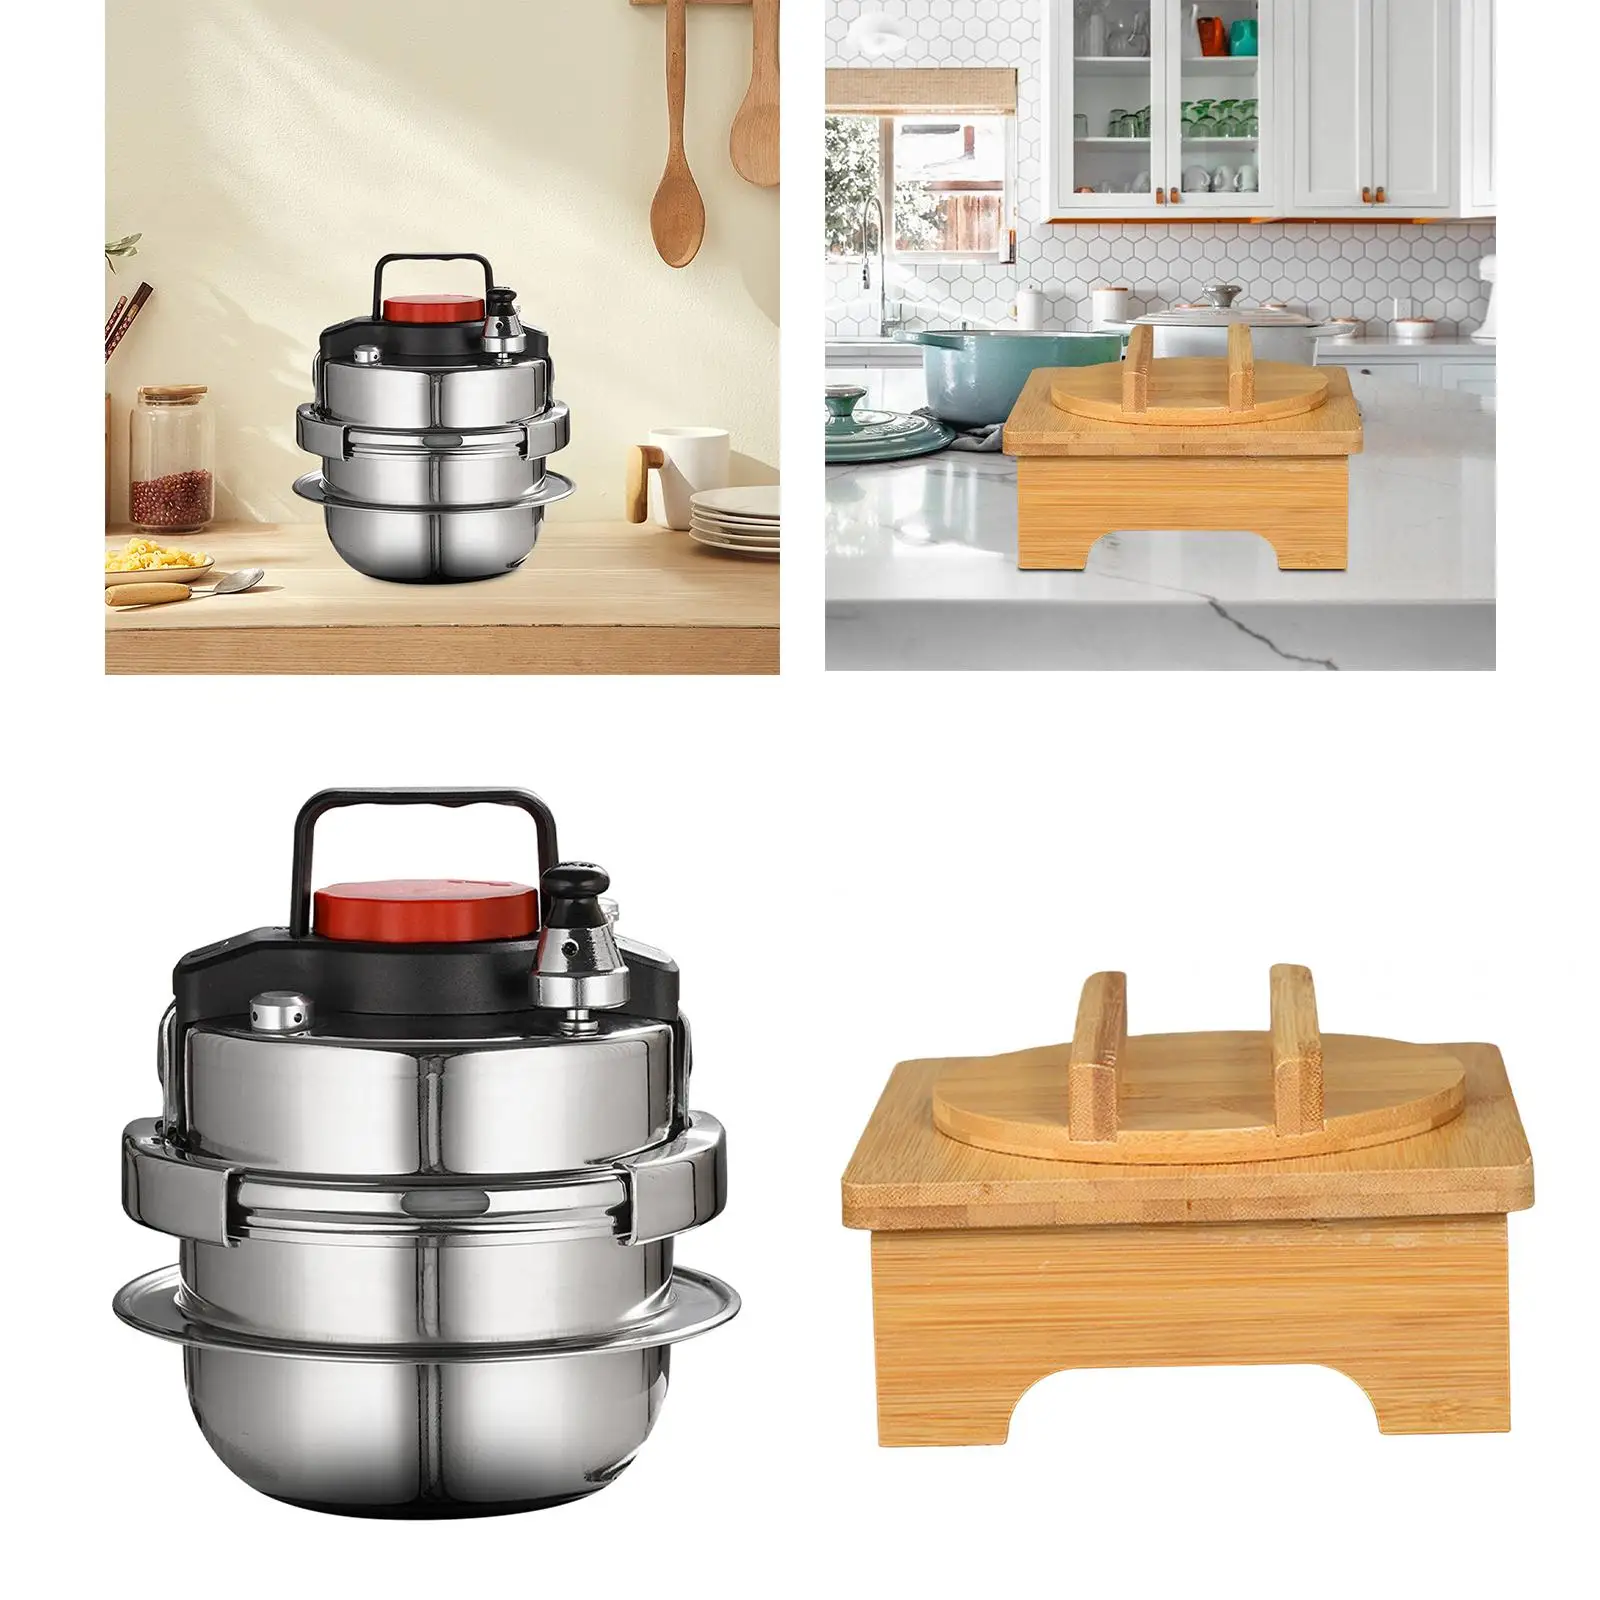 1.4L Small Pressure Cookers with Wooden pot holder